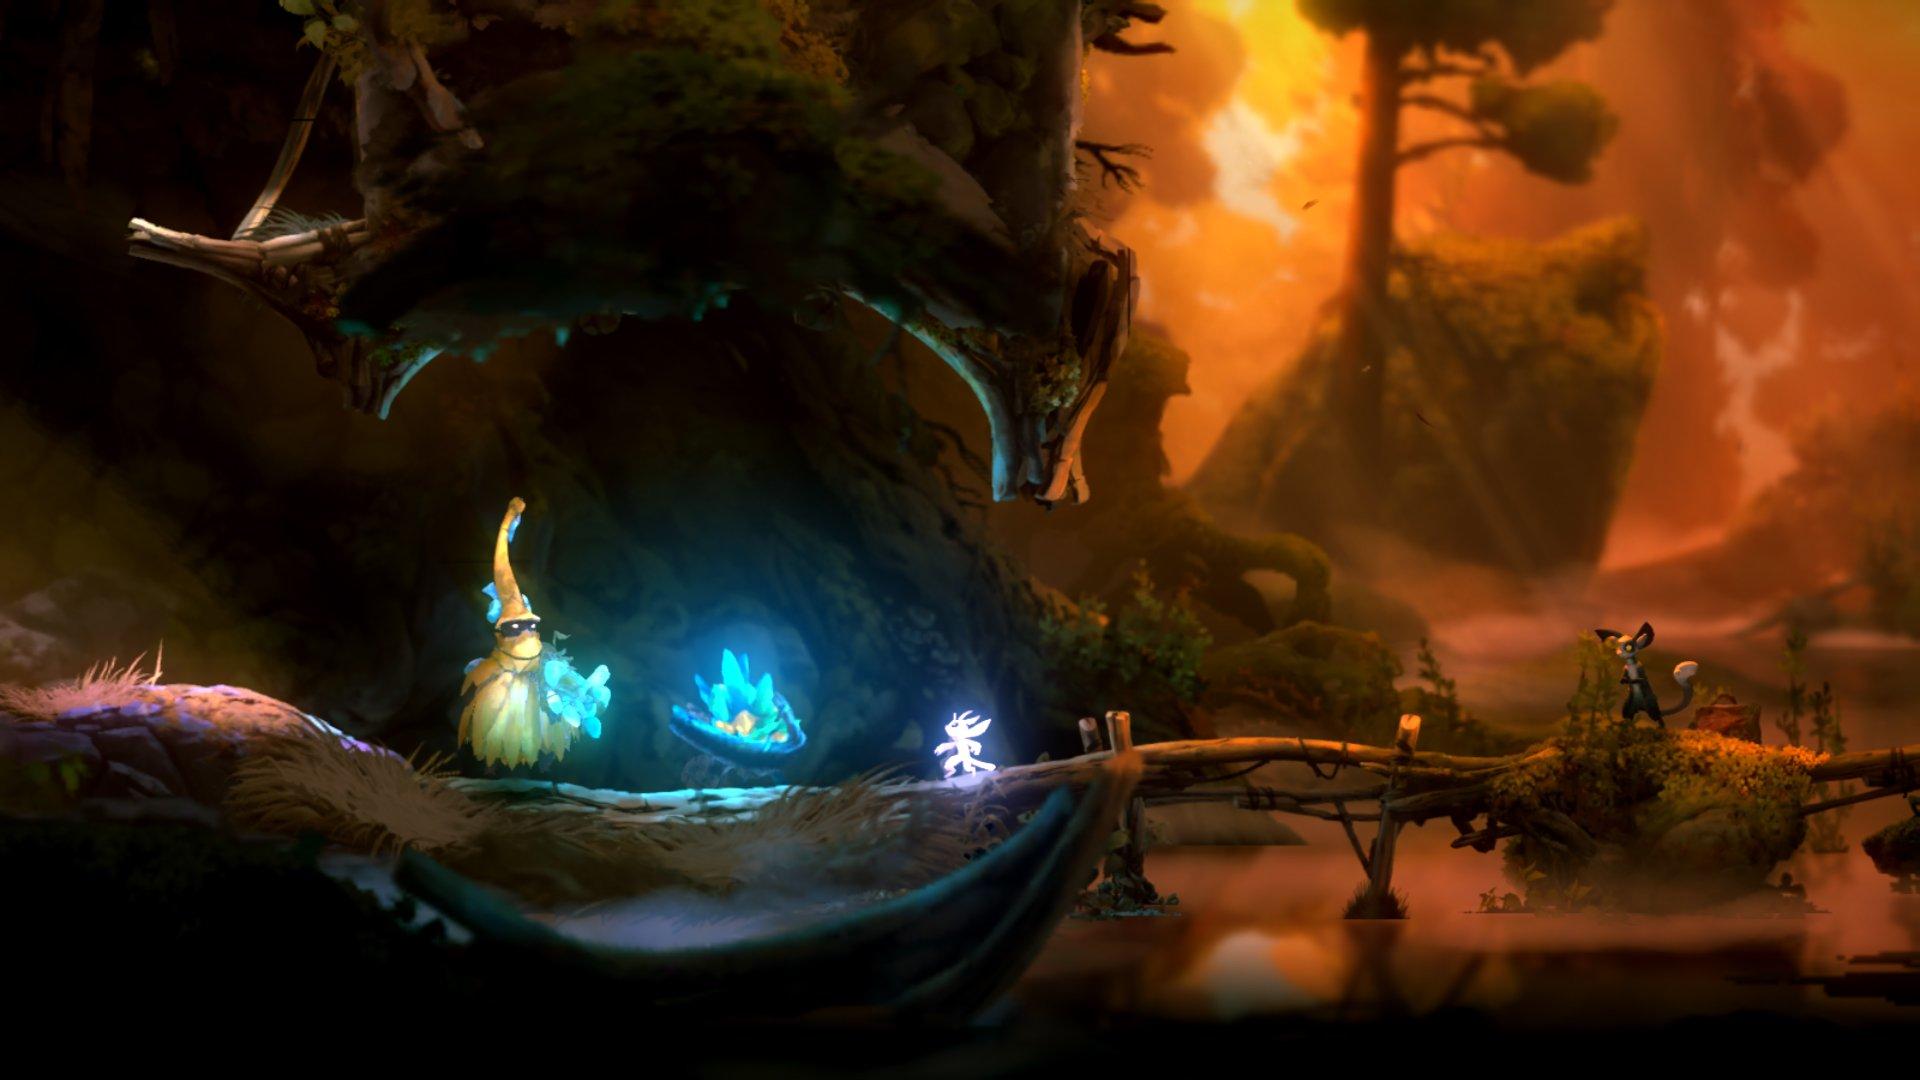 Ori and the Will of the Wisps' is available today on Switch